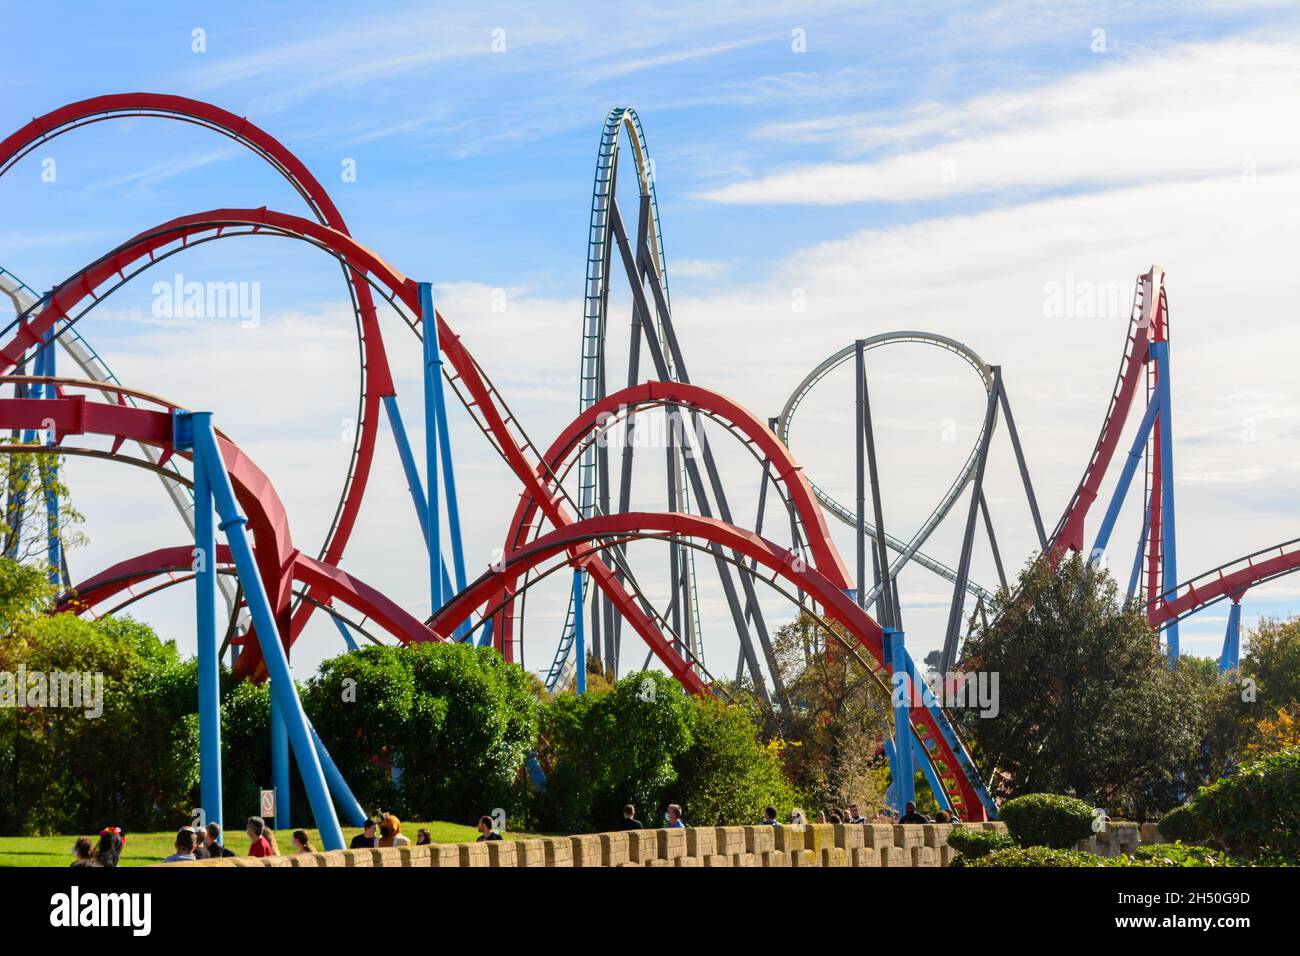 coTARRAGONA, SPAIN - october 2021: Shambhala is a steel Hyper Coaster  roller coaster located at PortAventura in Salou, Spain. Its the 2nd tallest  (256 Stock Photo - Alamy